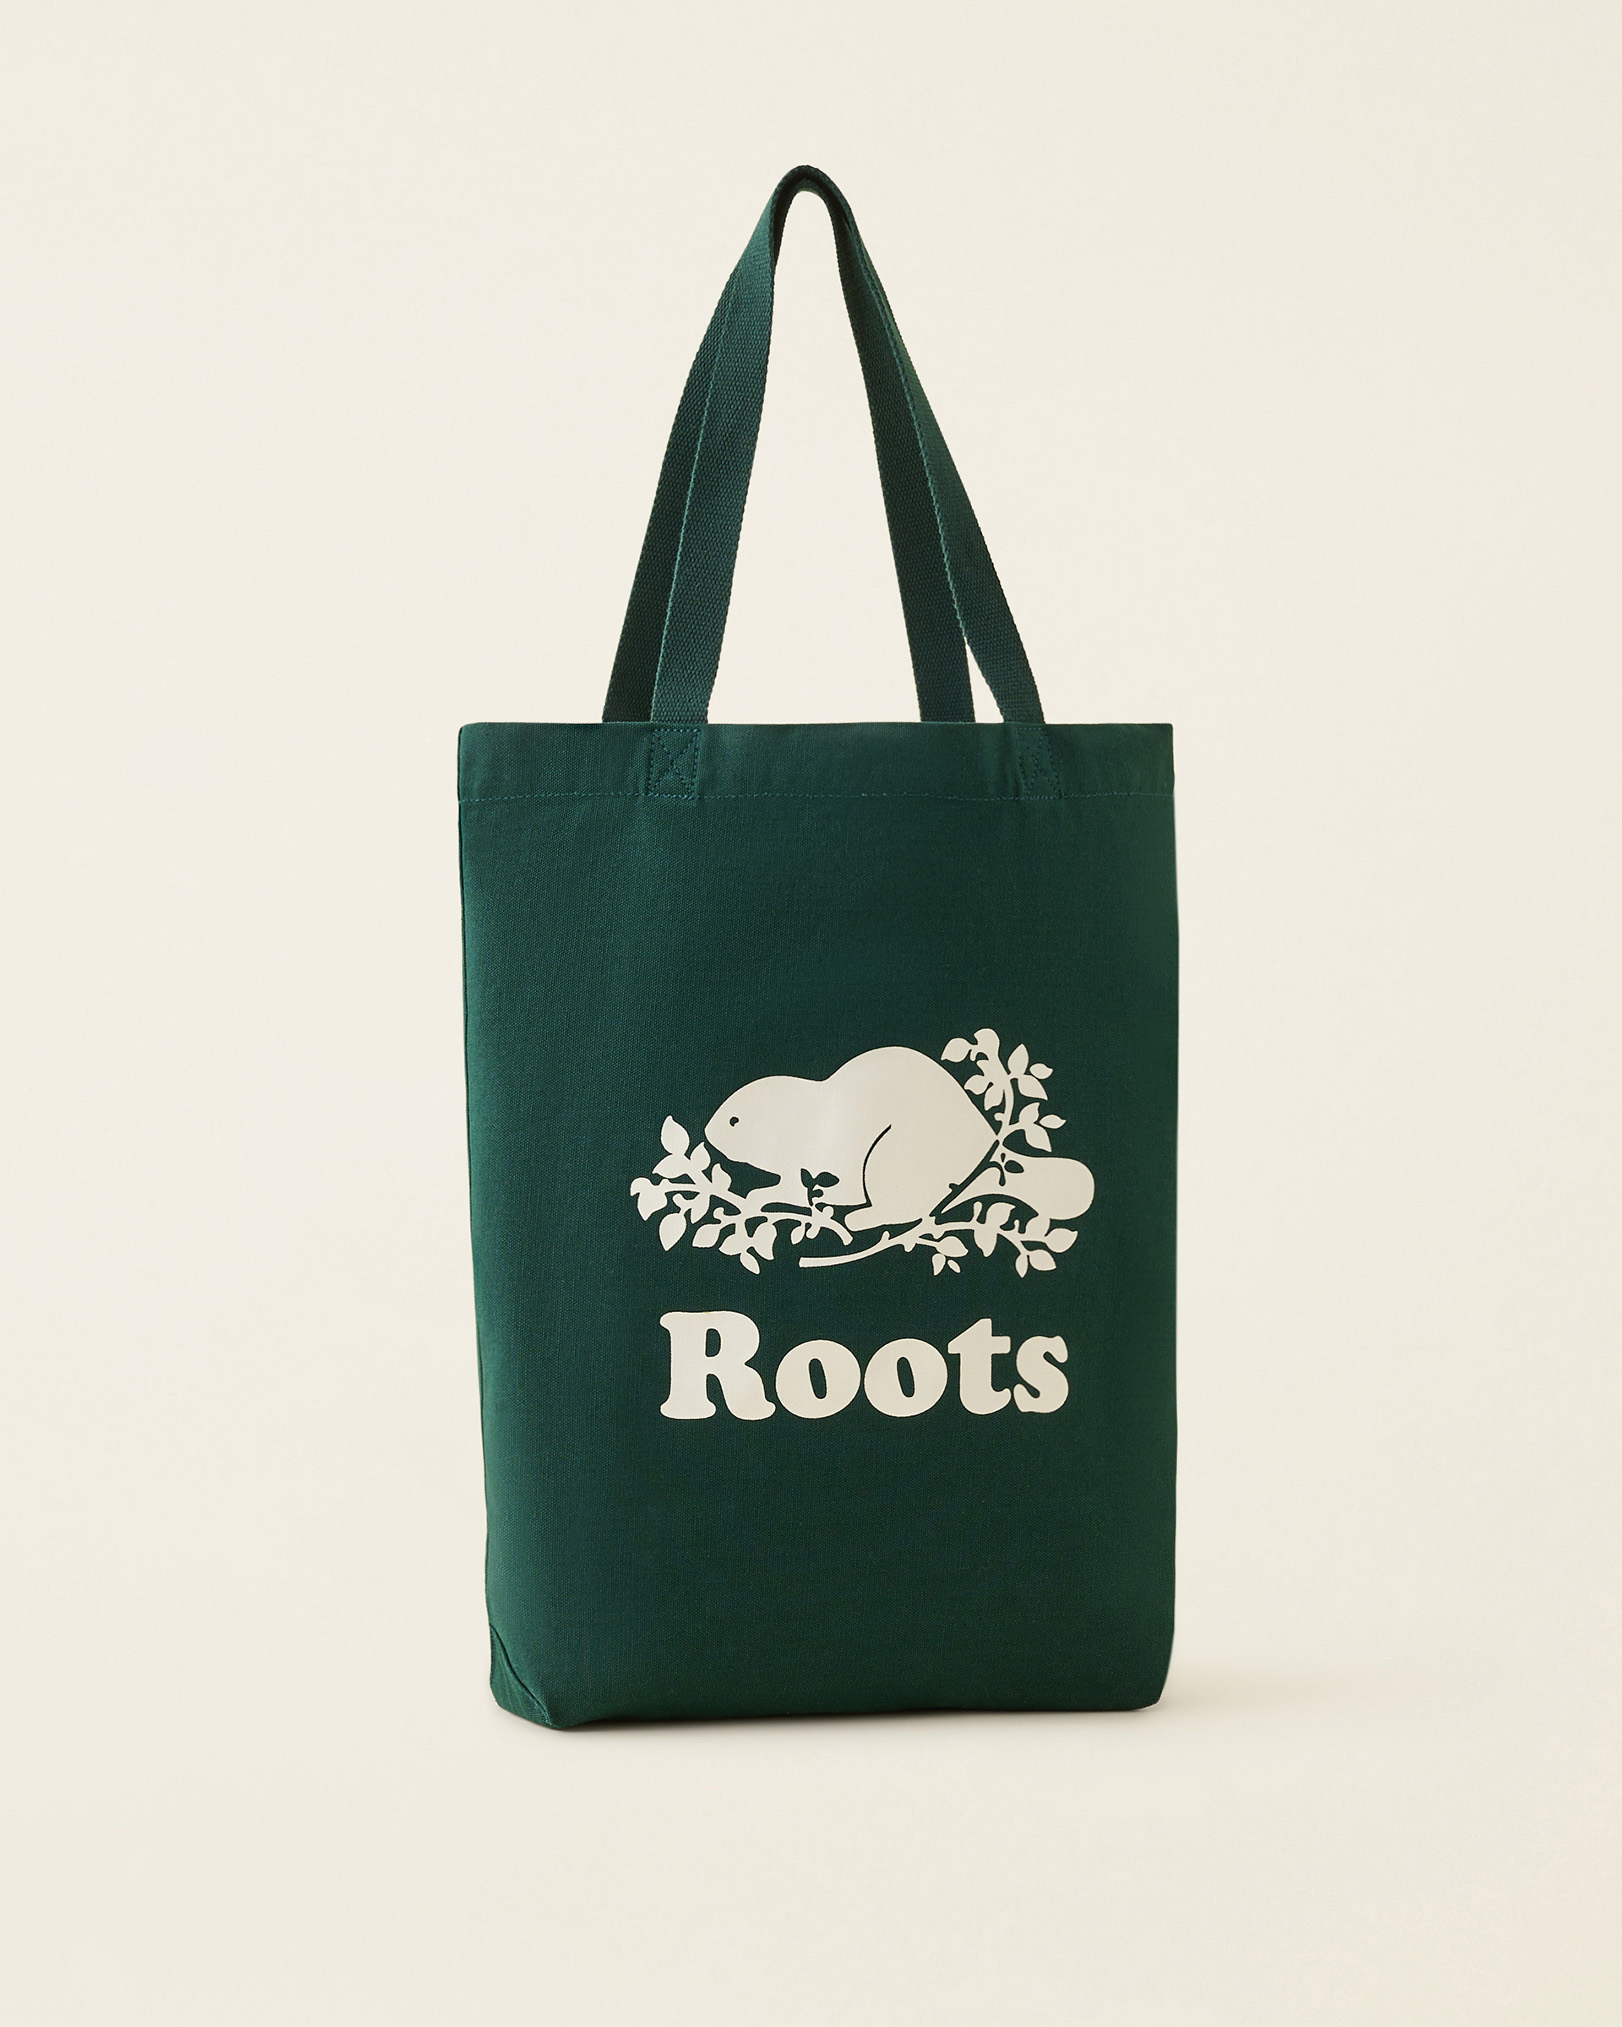 Roots Cooper Tote in Varsity Green